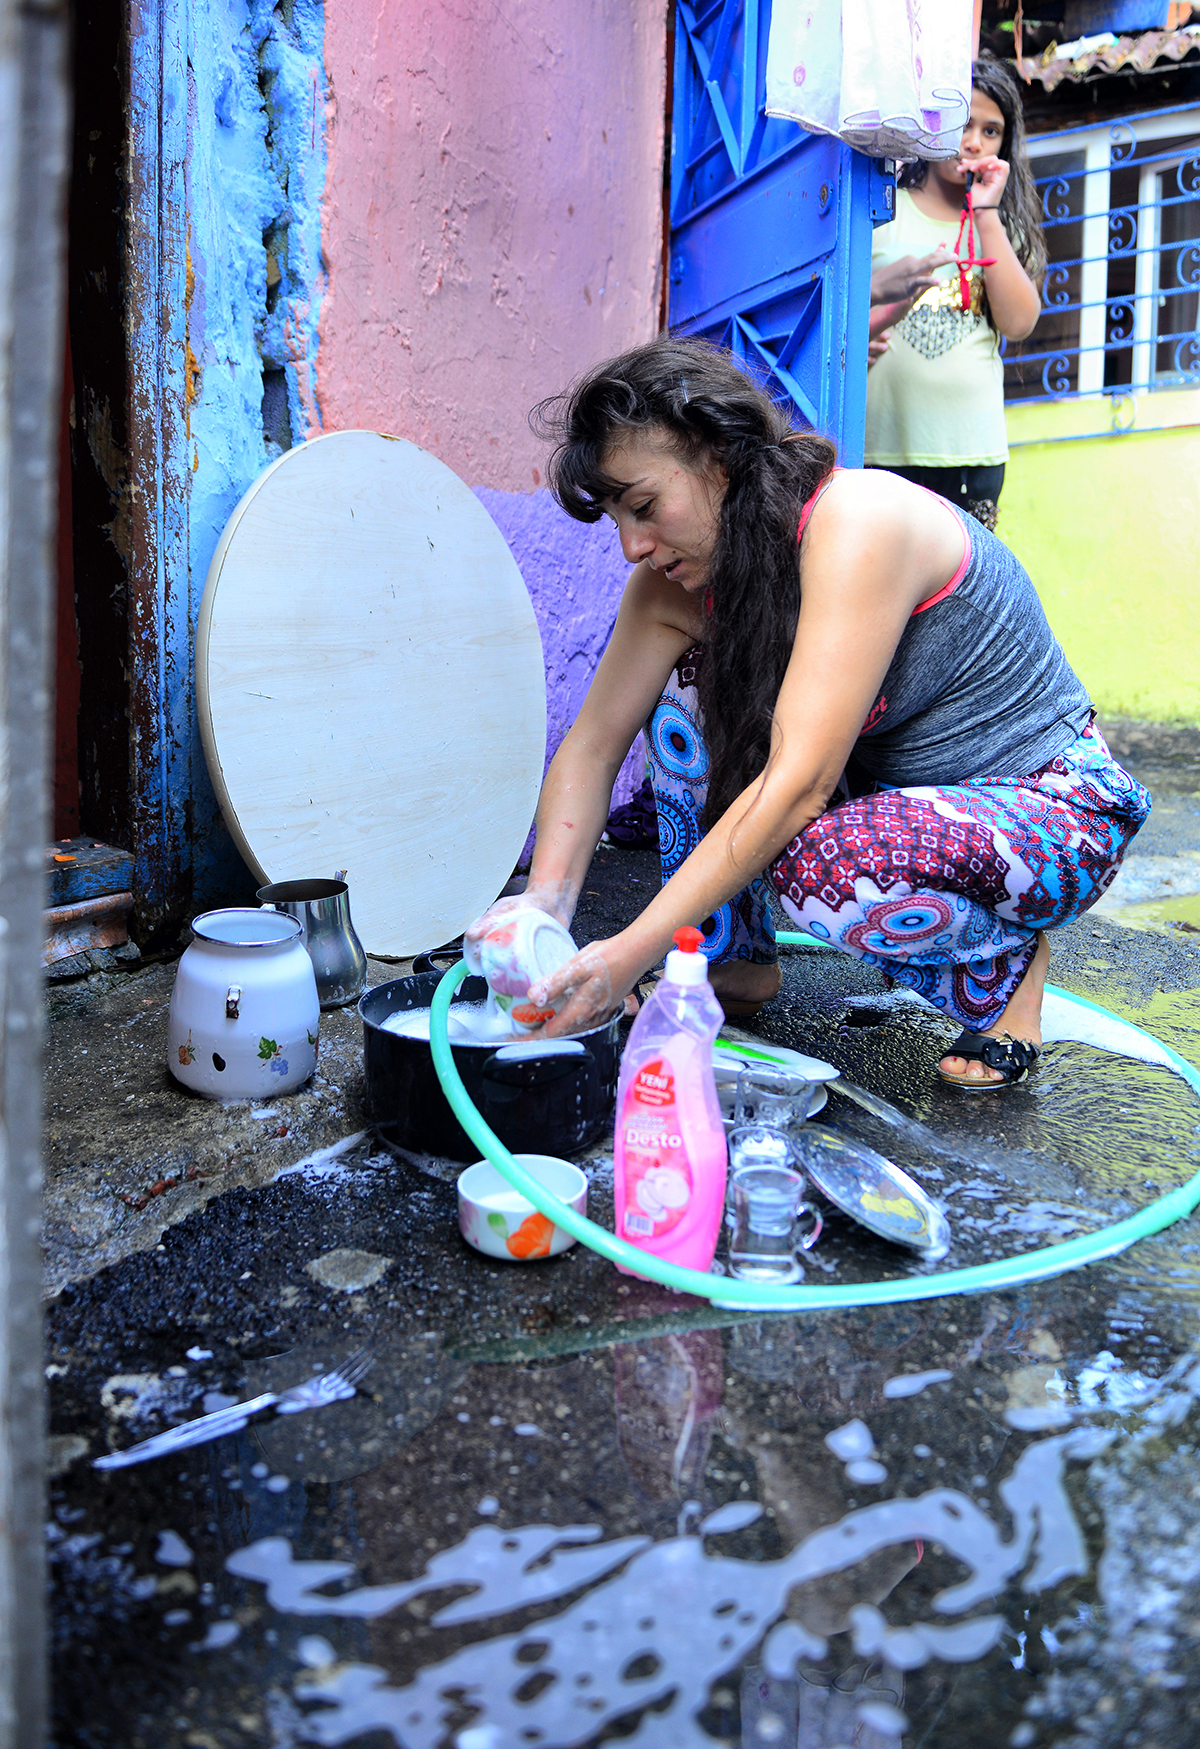 #242 —Sarıyer - 
A woman washing dishes on the street.